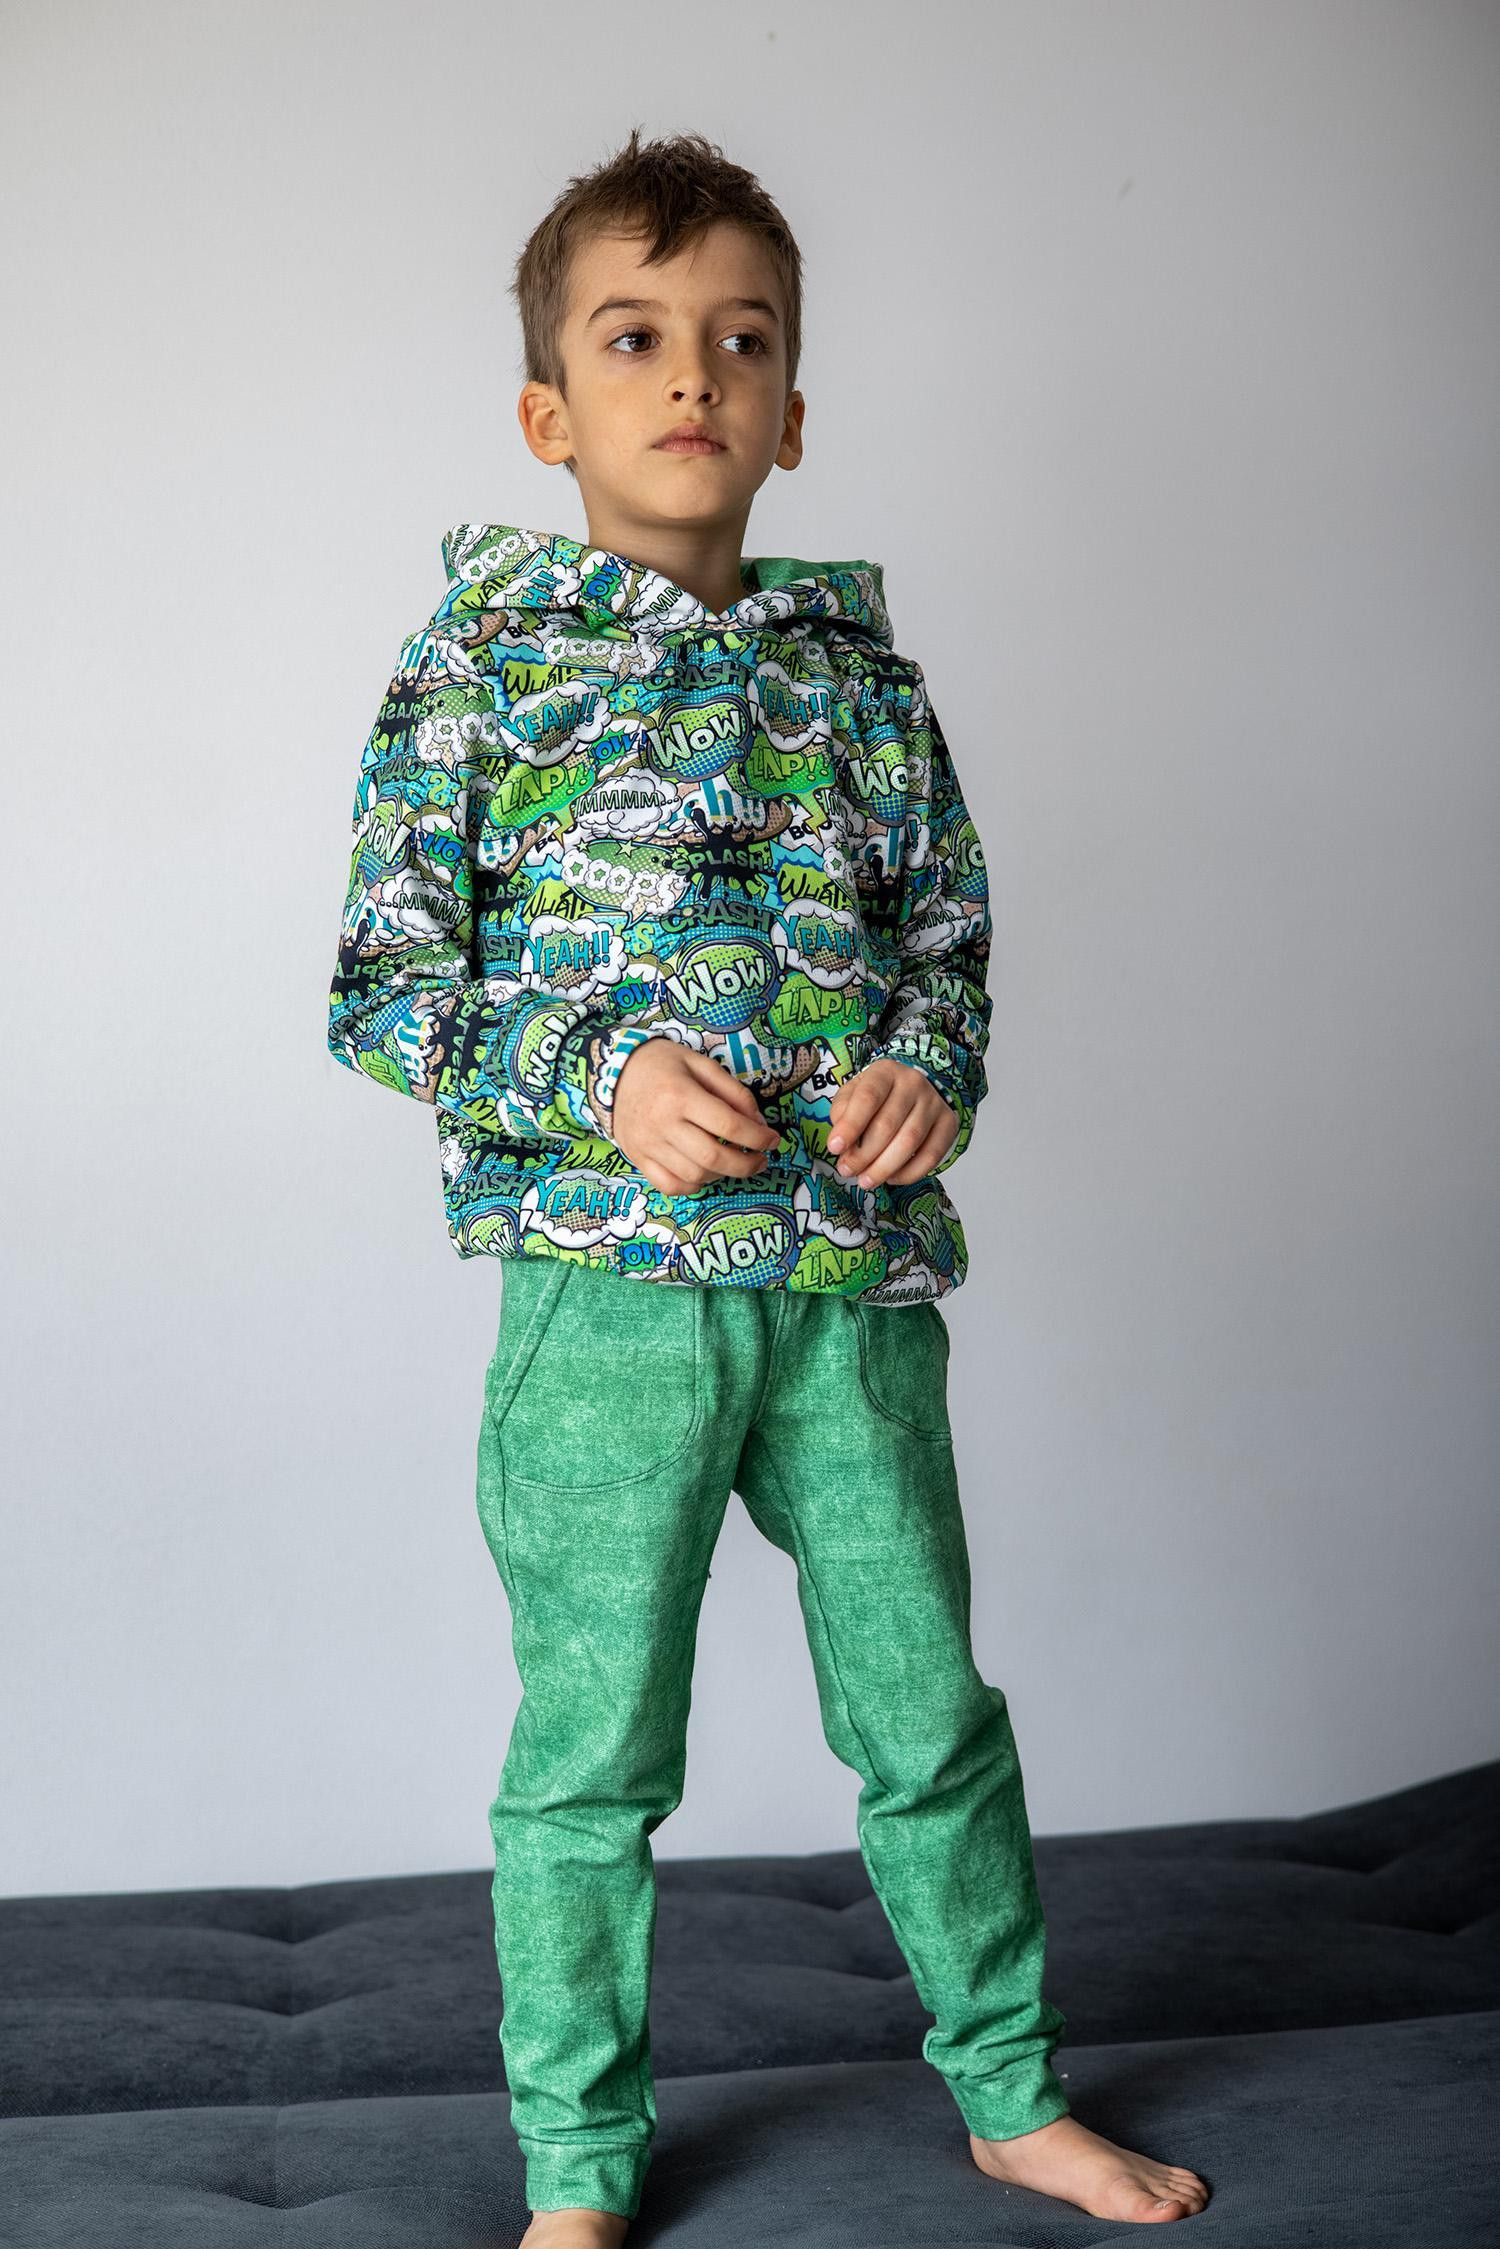 Children's tracksuit (OSLO) - B-27 LUSH MEADOW - looped knit fabric 